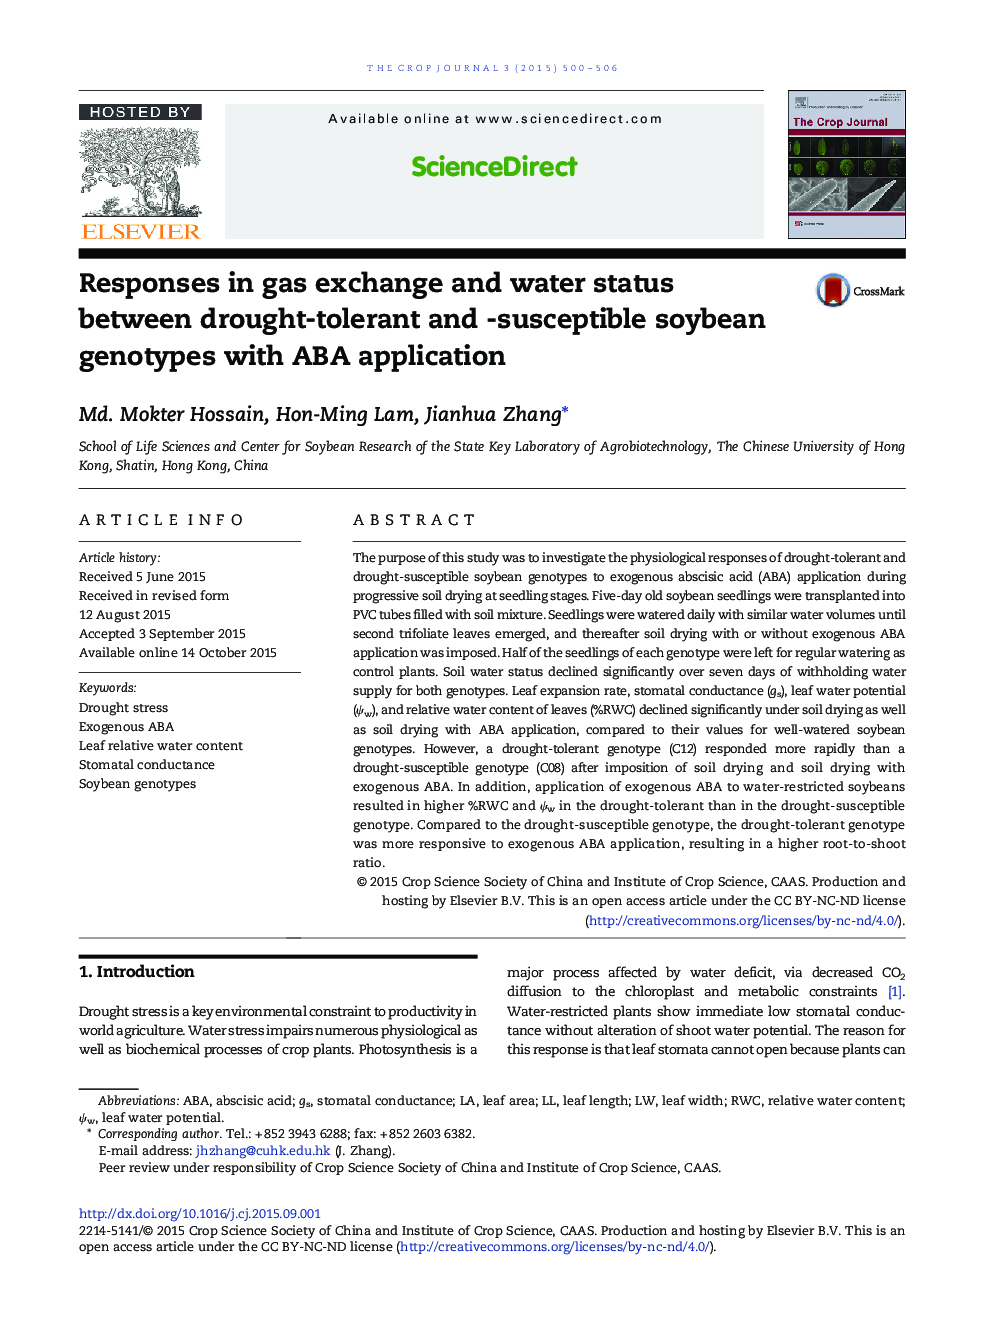 Responses in gas exchange and water status between drought-tolerant and -susceptible soybean genotypes with ABA application 